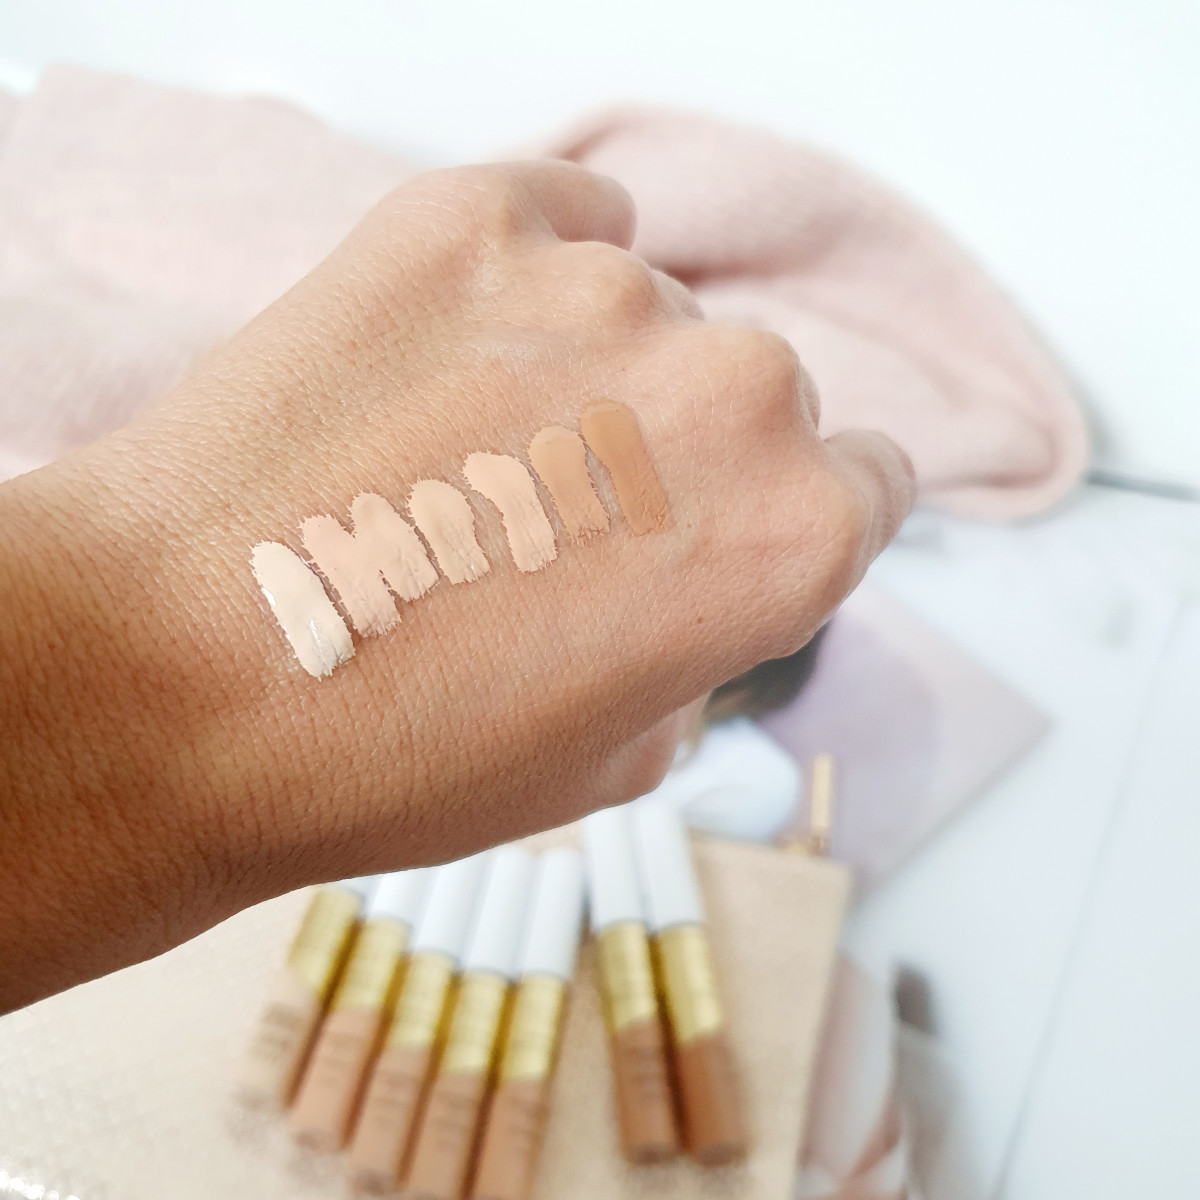 Max Factor Miracle Pure Concealer